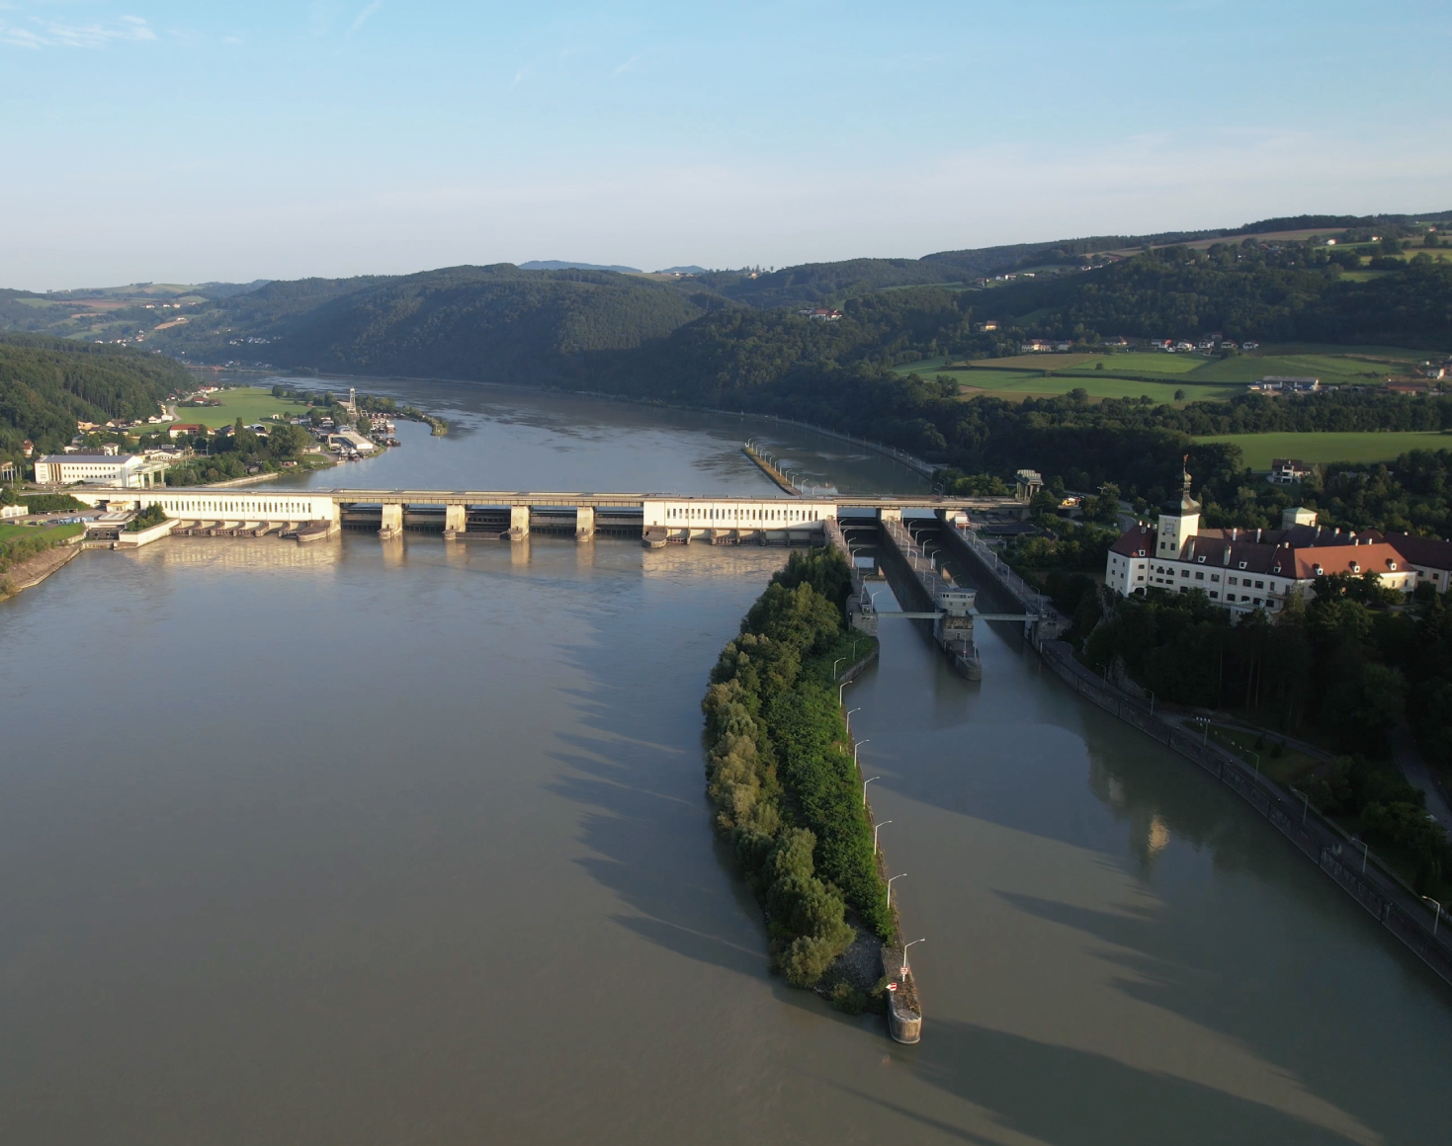 In the picture, the Ybbs-Persenbeug Danube power station is visible from the air from the downstream side. While the beautiful landscape with many forests and the course of the dark blue Danube can be seen in the background, the village of Persenbeug shines in the sunshine on the right. In the background you can still see the blue sky above the landscape.